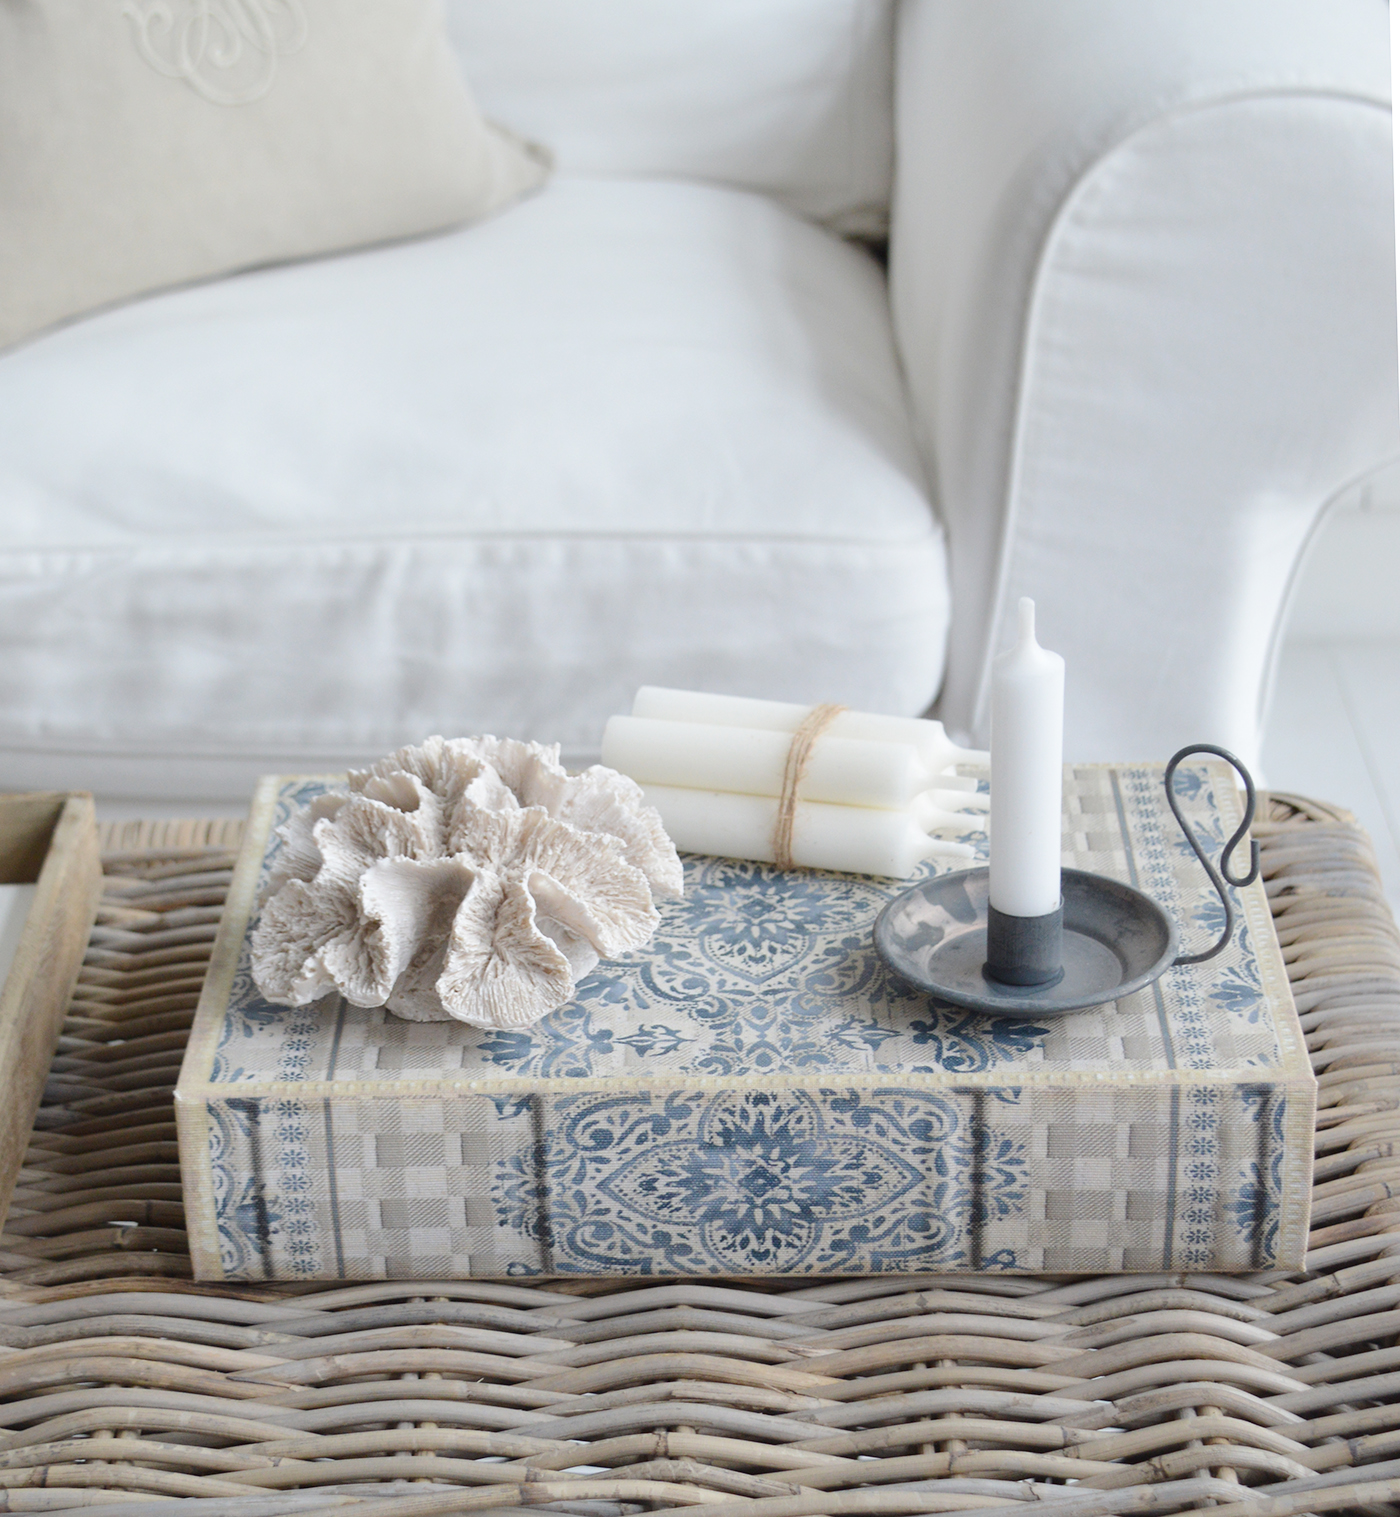 New England home accessories and decor for coastal , country and modern famhouse. Faux white coral for coffee table styling